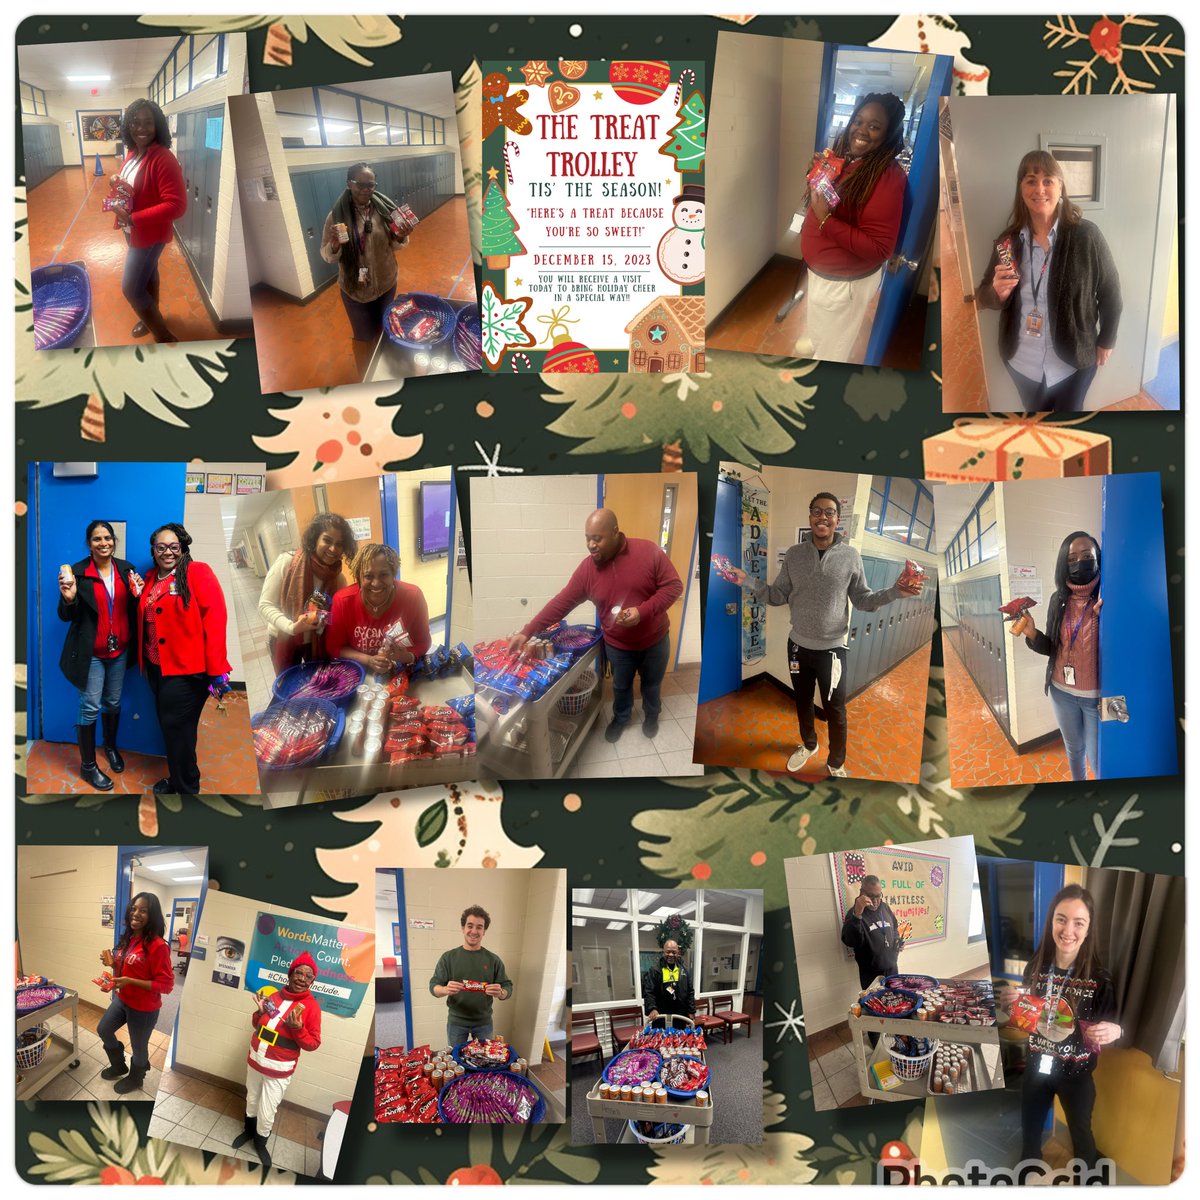 The Treat Trolley made its way around the school bringing good cheer, well wishes, and of course snacks! Thank you to our staff for their hard work and dedication.